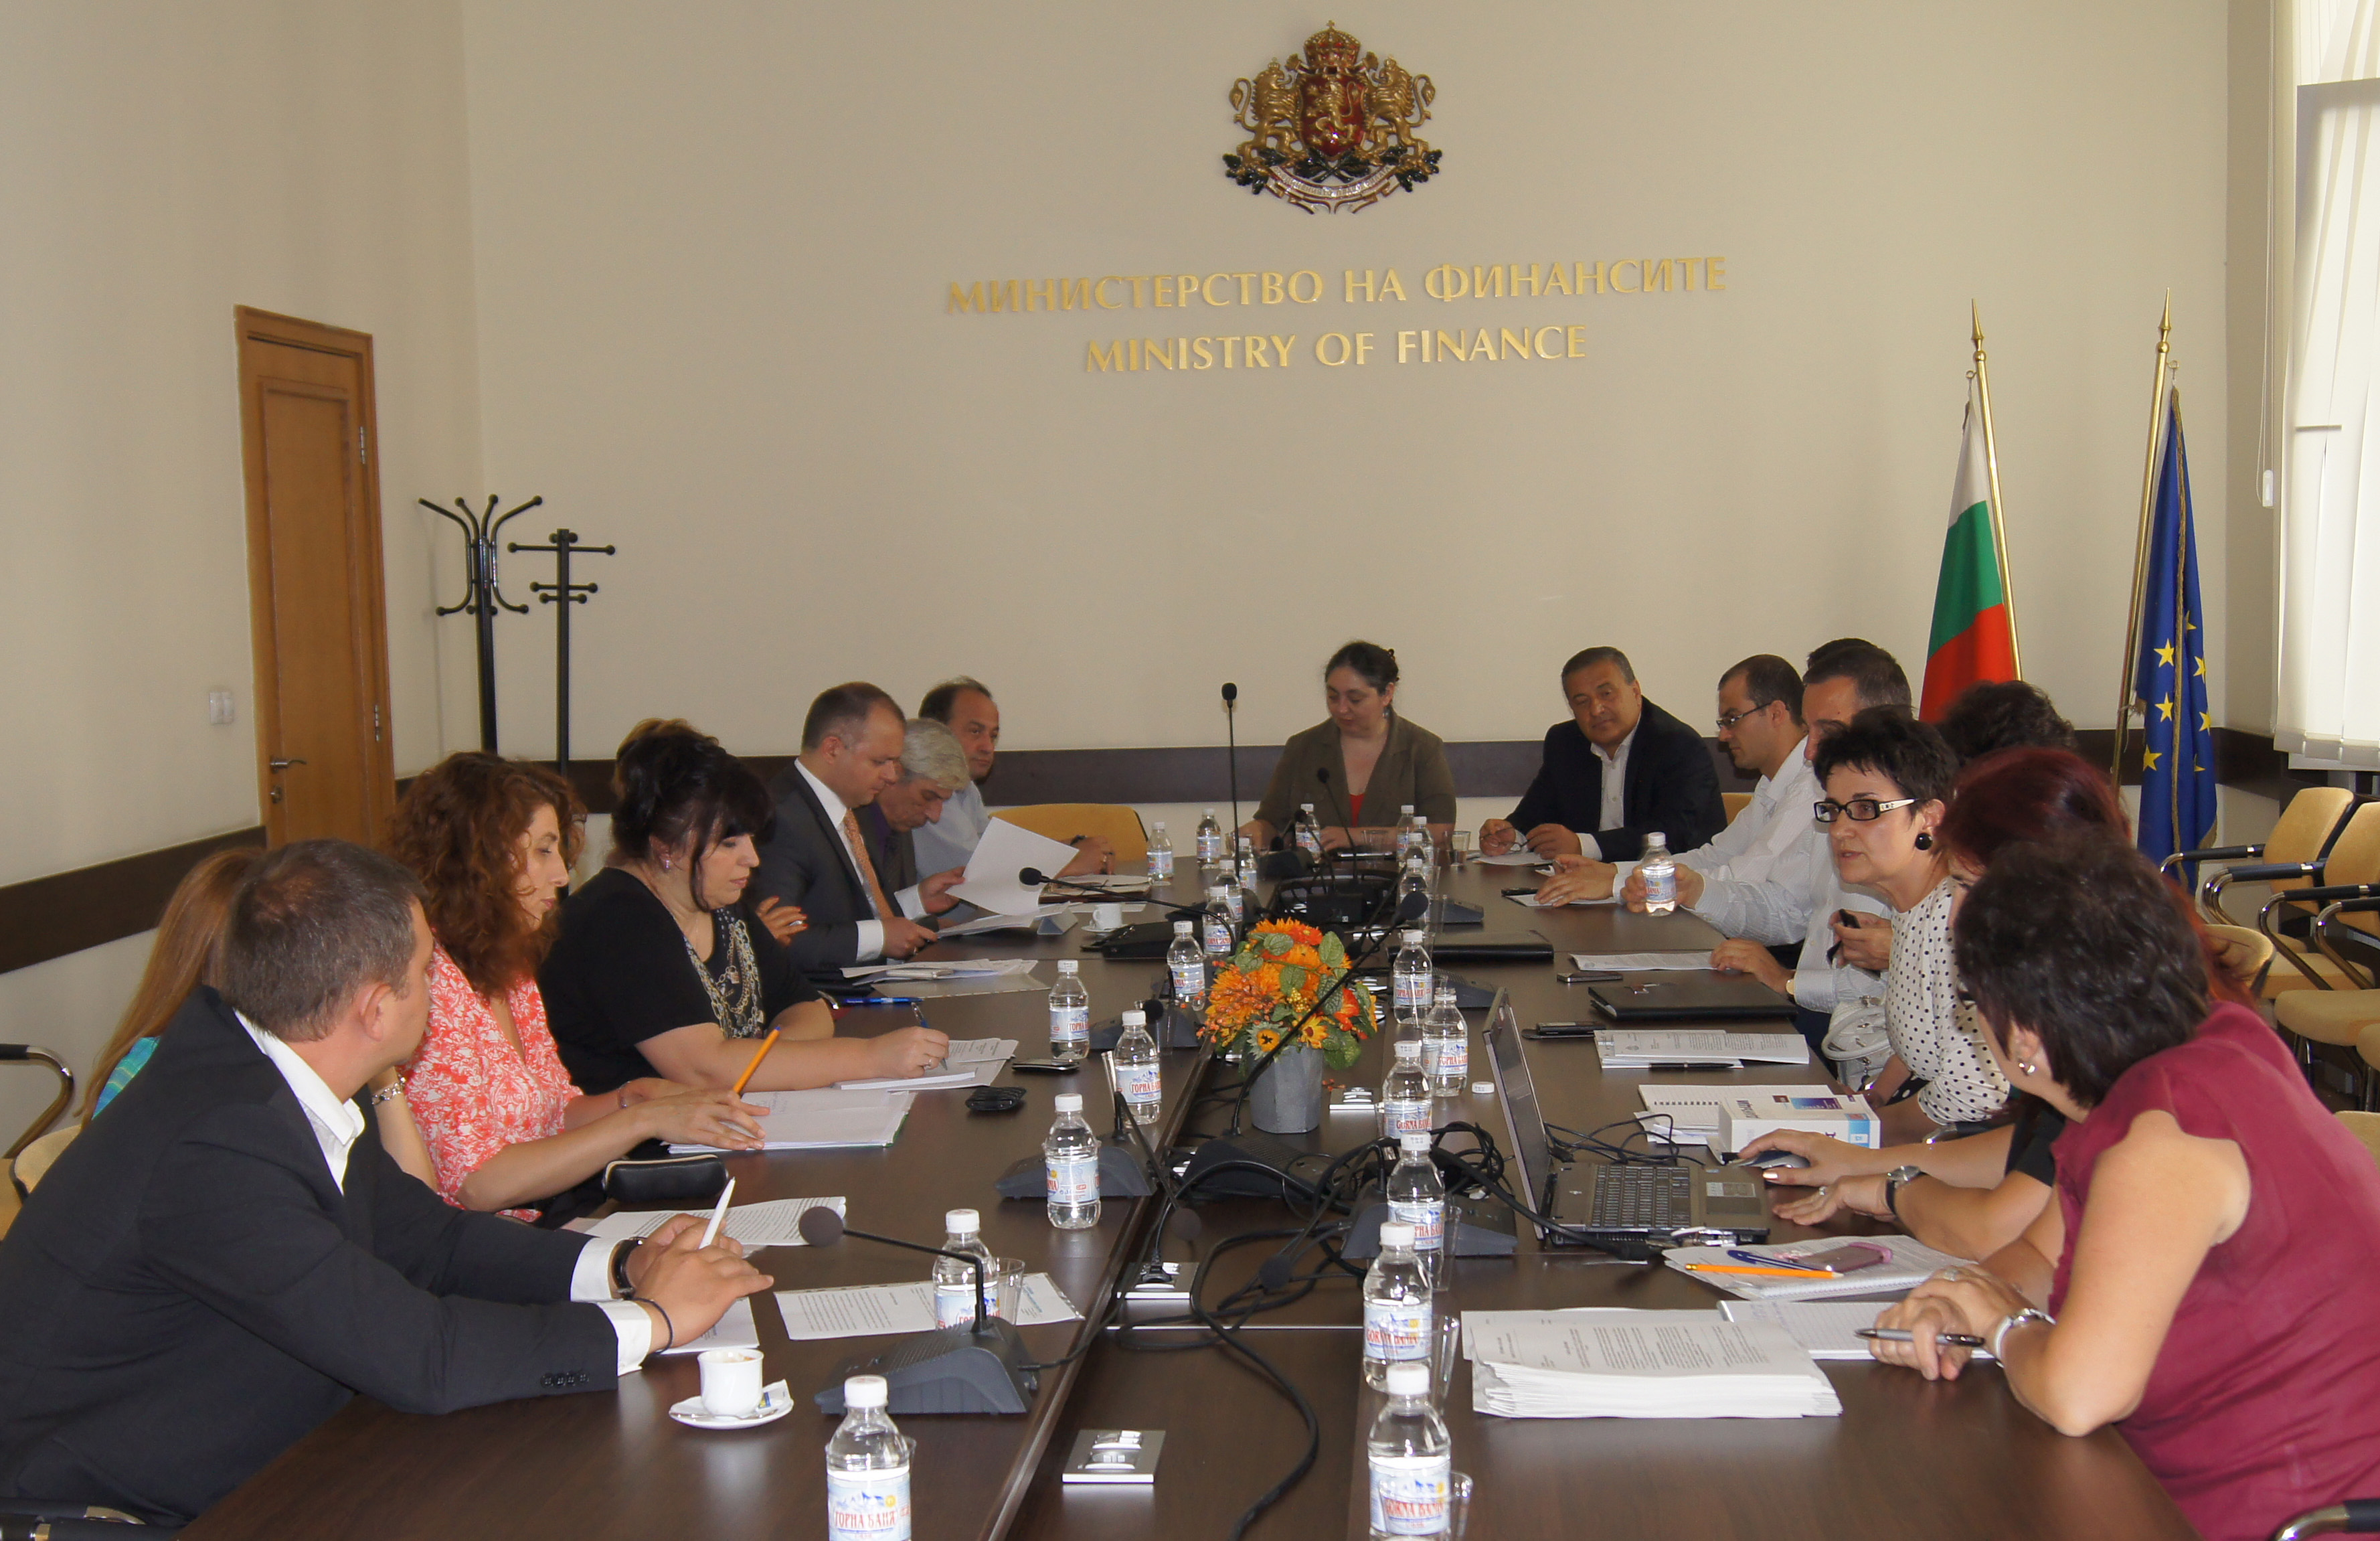 ADMINISTRATIVE AND LEGISLATIVE MEASURES TO INCREASE BUDGET REVENUES HAVE BEEN DISCUSSED AT THE MINISTRY OF FINANCE